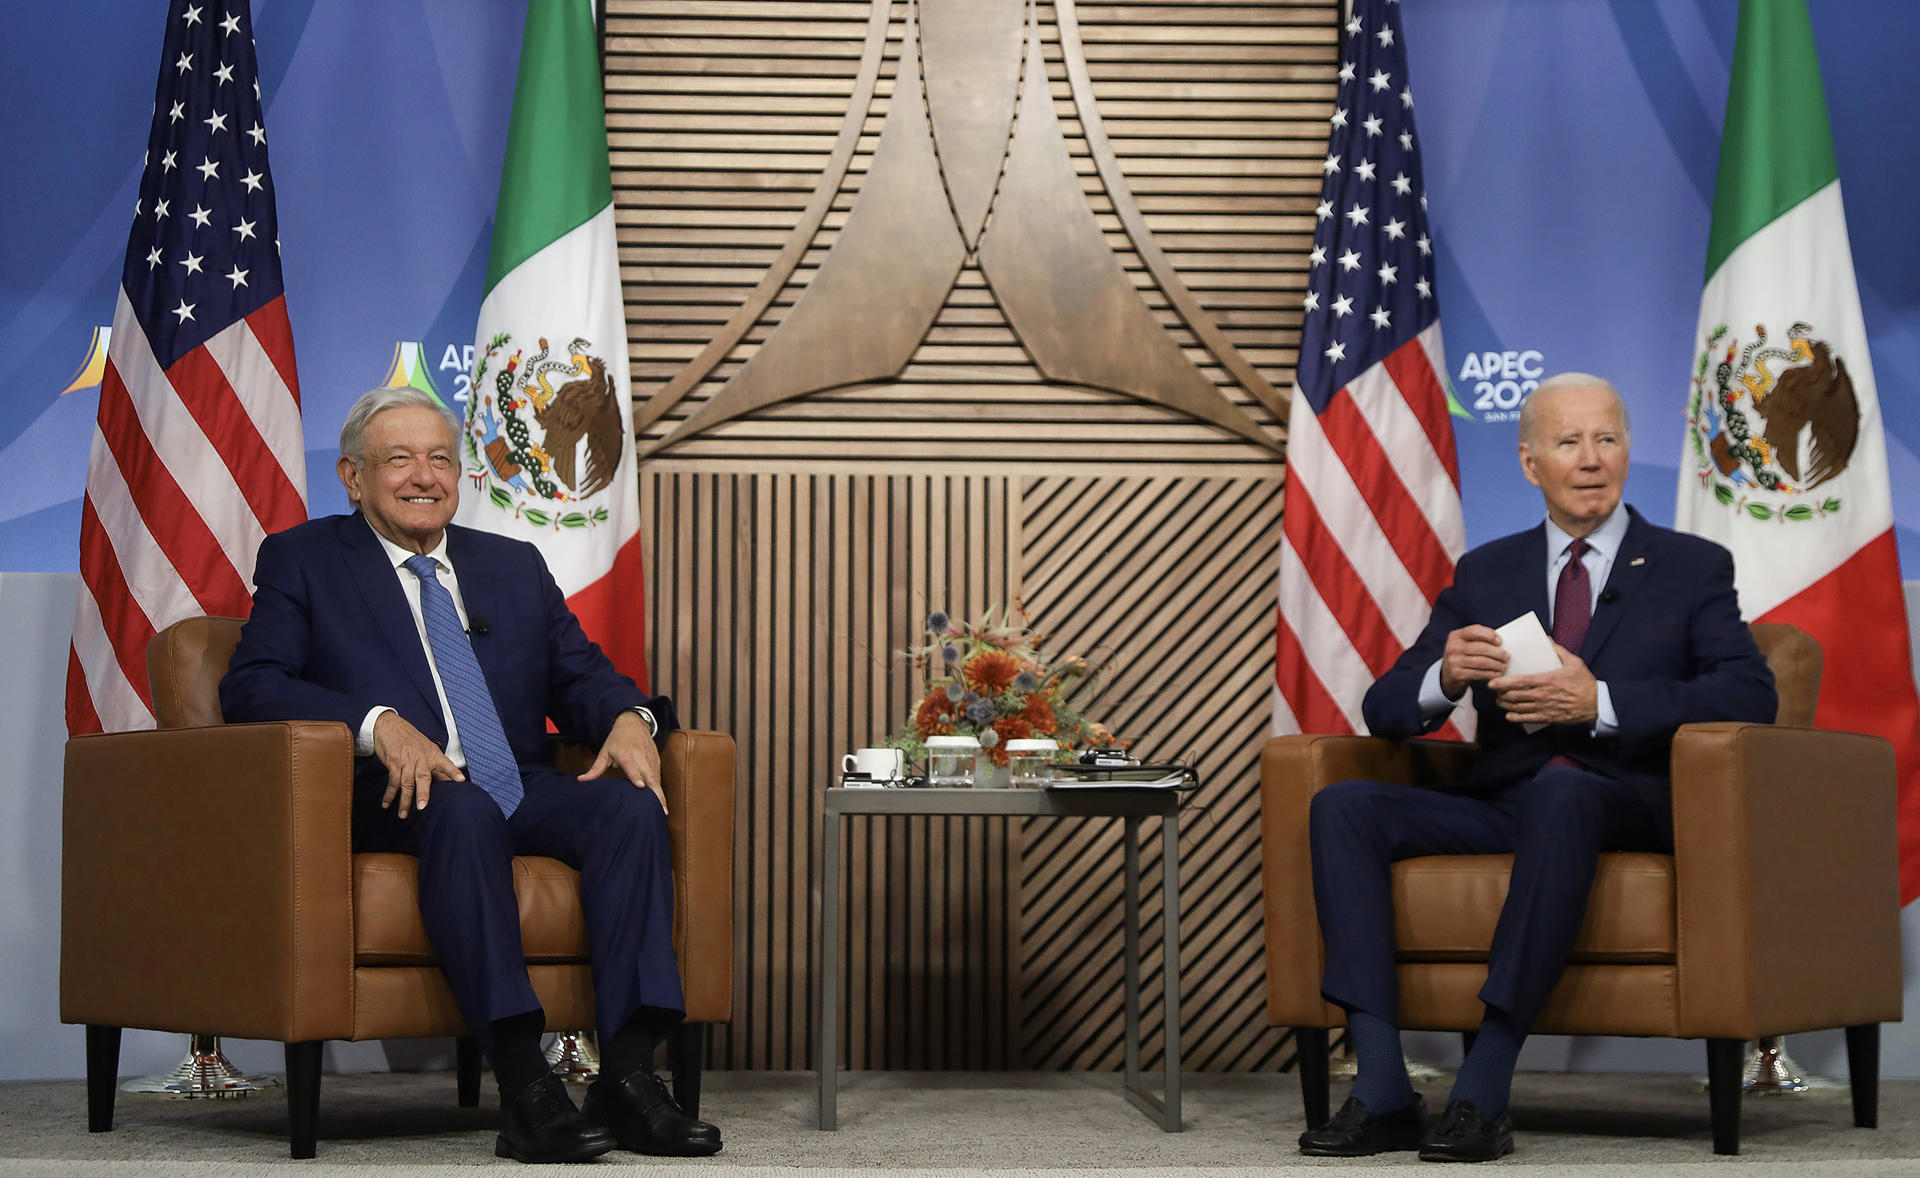 Photo provided by the Presidency of Mexico of Mexican President Andrés Manuel López Obrador (L) and his US counterpart Joe Biden (R) at the Asia-Pacific Economic Cooperation (APEC) summit in San Francisco, United States, 17 November 2023. EFE/Presidency of Mexico/Editorial Use ONLY/AVAILABLE ONLY FOR ILLUSTRATION OF THE ACCOMPANYING NEWS (OBLIGATORY CREDIT)